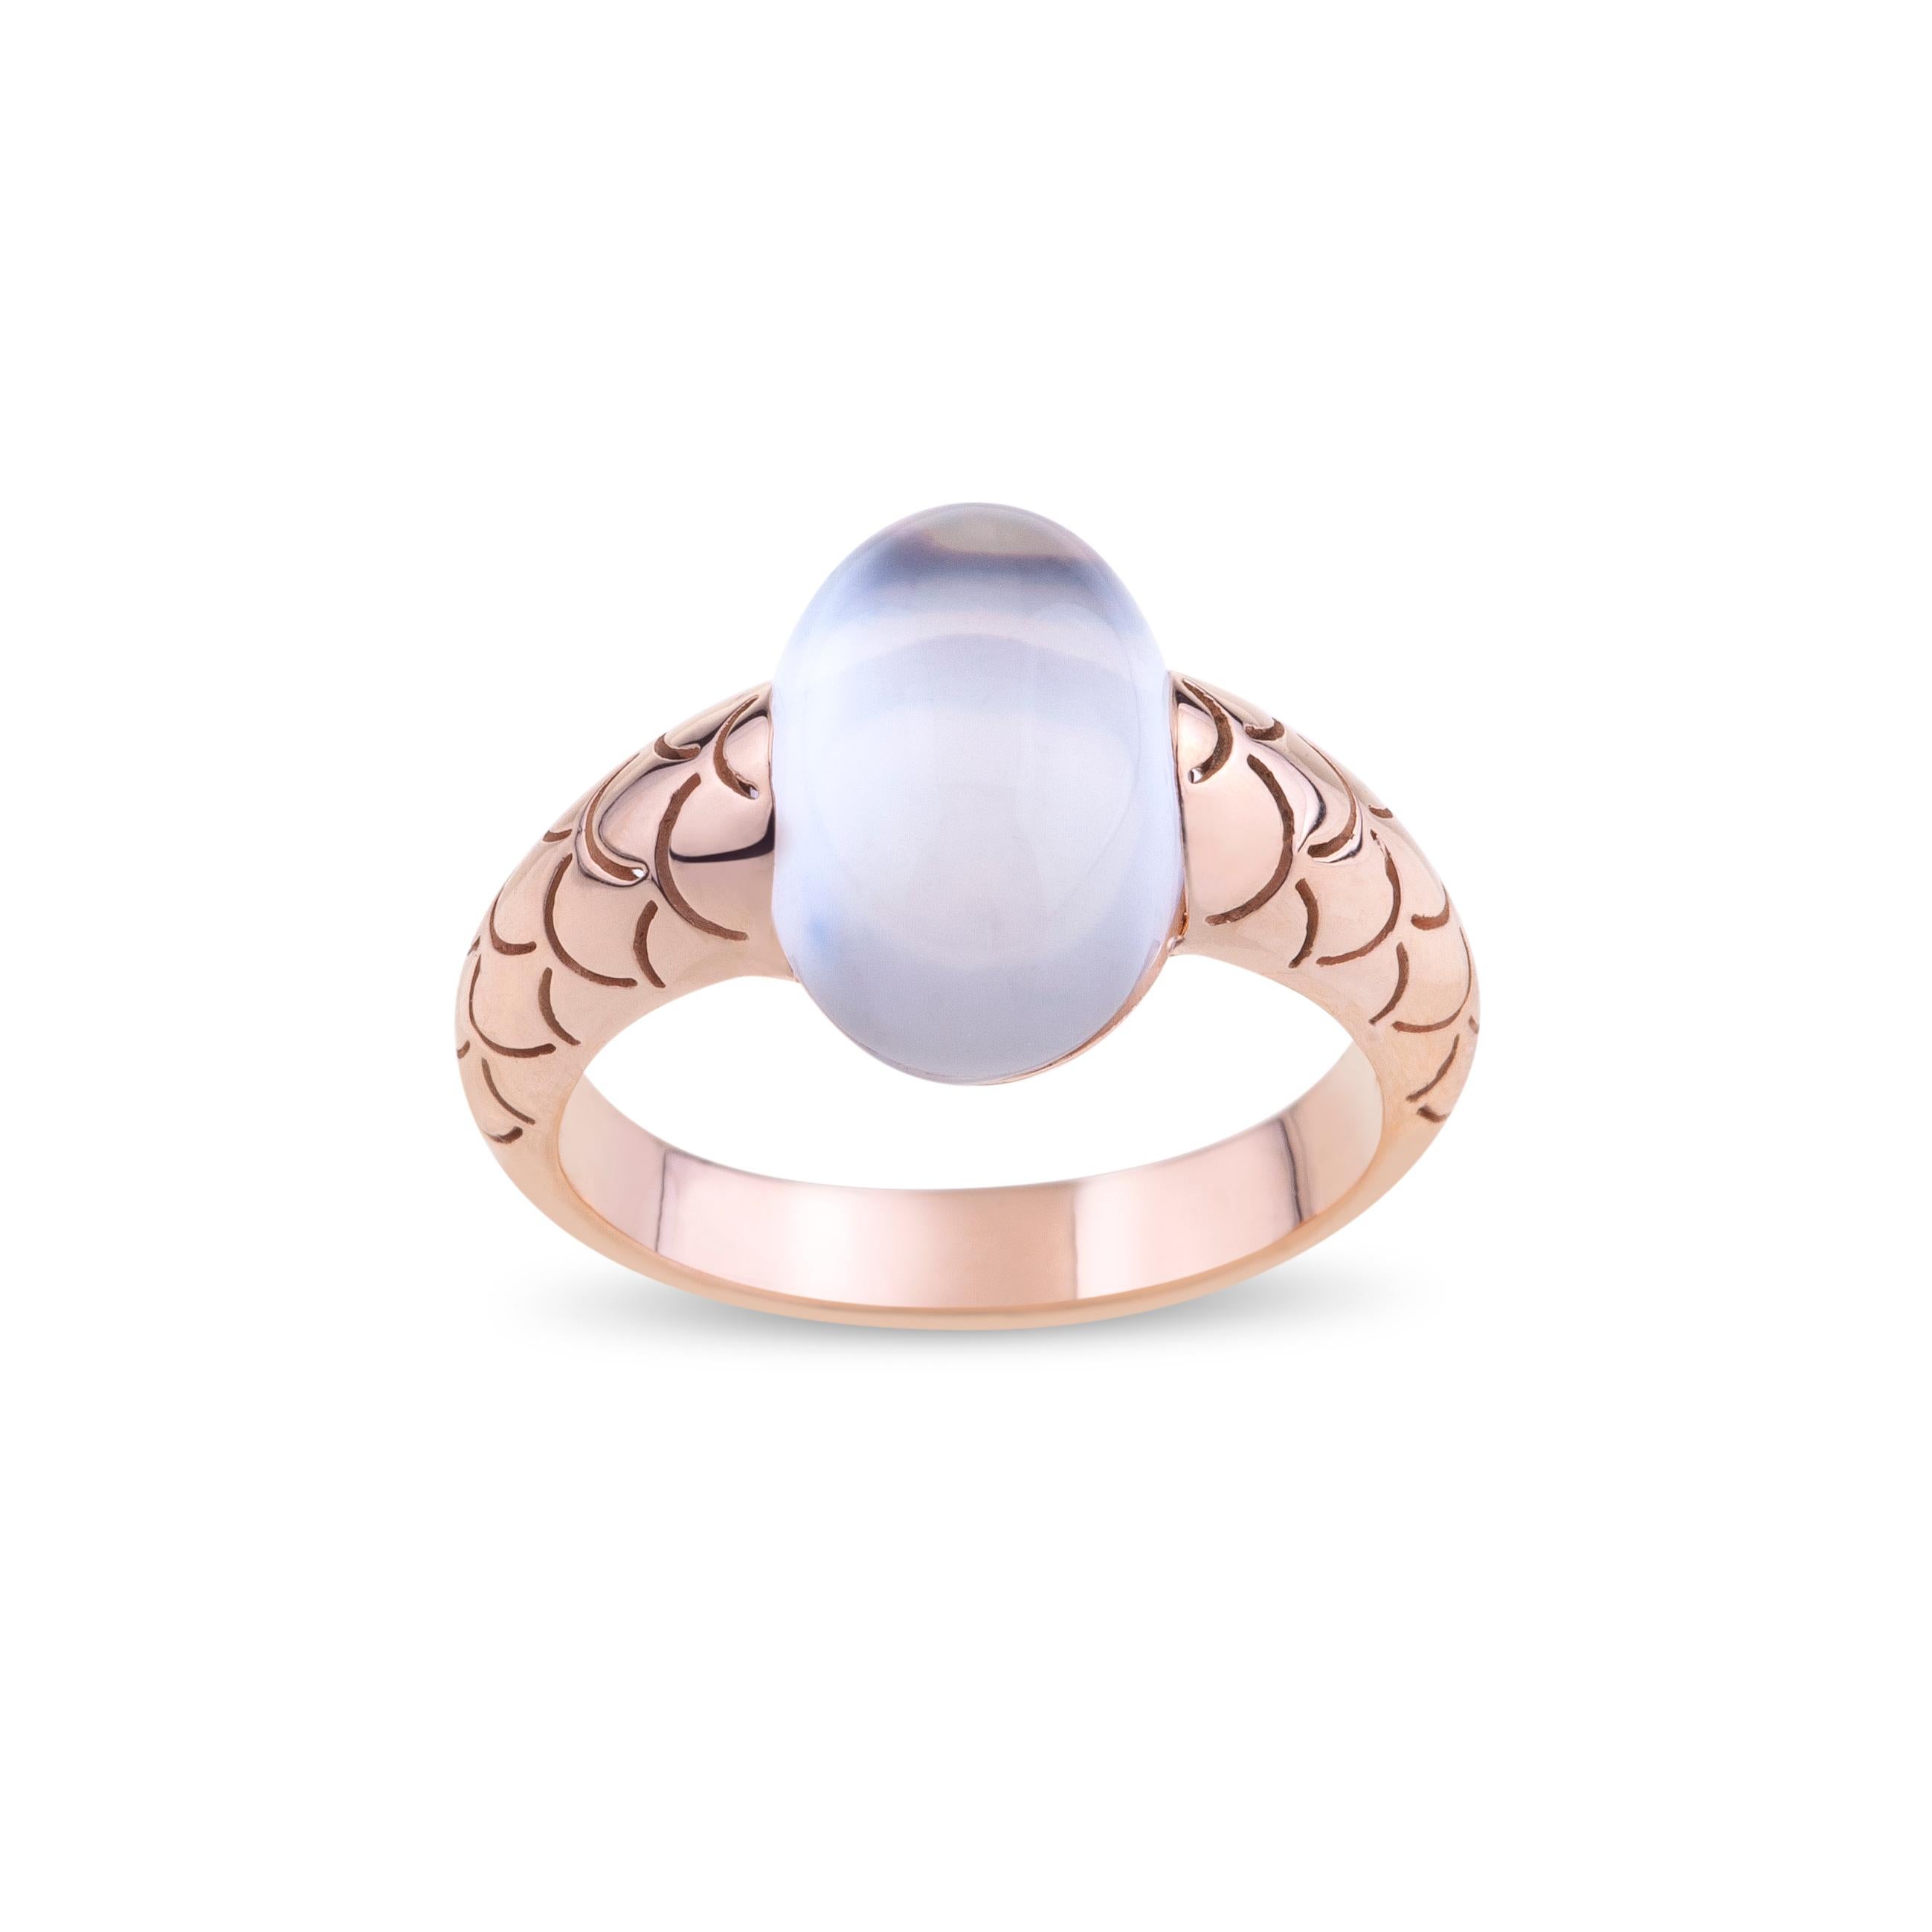 Angeletti Wave Rose Gold With Cabochon Mother Pearl Cocktail Ring (thin model)
New Wave Version, Designed and Manifactured in Rome. Available in Different Size.
Gold Weight is Around 5 Grams and the Size is 13 but Very Confortable for a range of